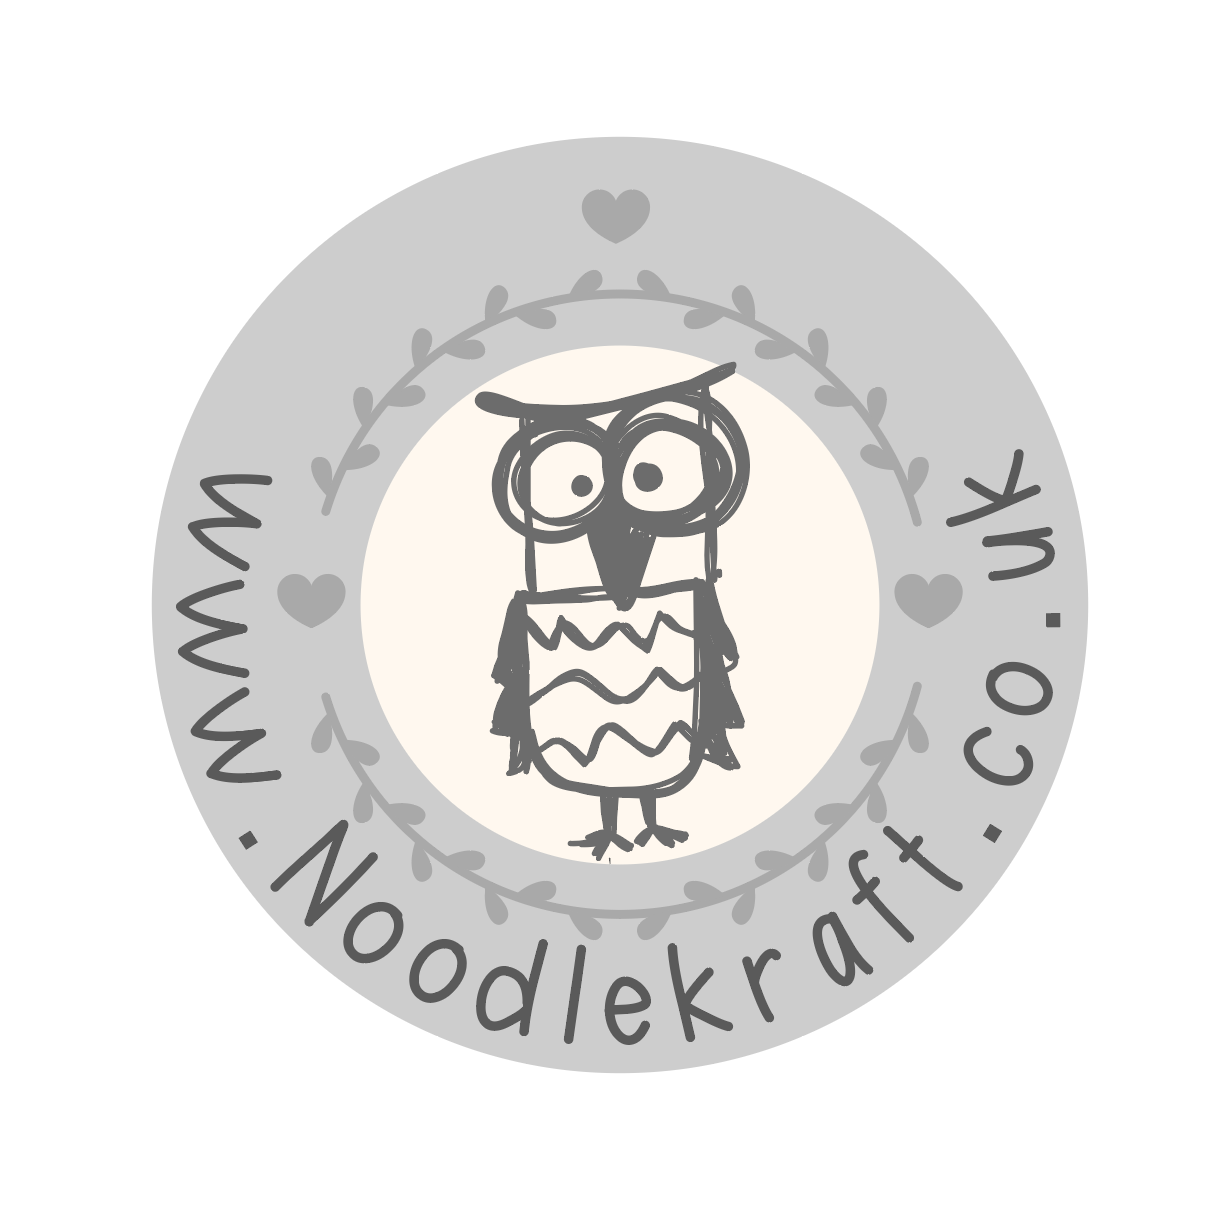 Noodlekraft logo with a picture of an hand drawn sketch owl in the middle of a circle and writing around the outside of the own that says www.noodlekraft.co.uk 